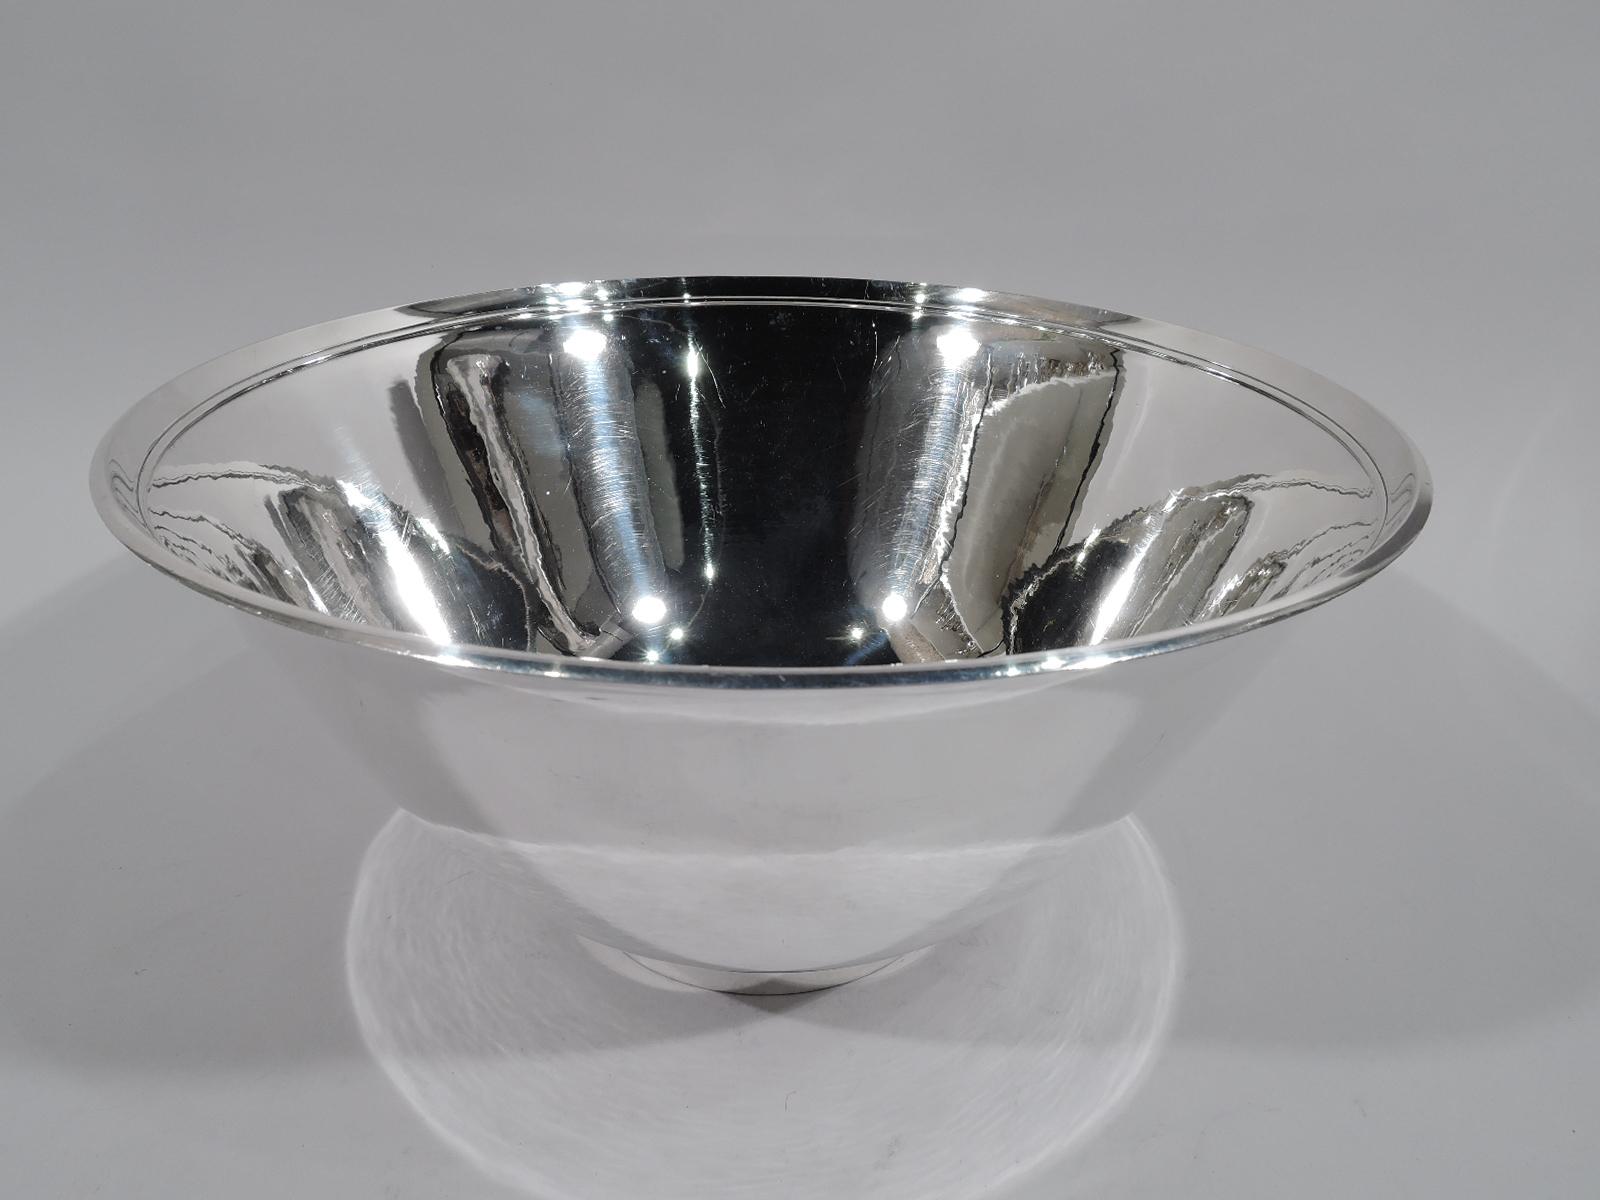 Large and modern sterling silver centerpiece bowl with beautiful hand hammering. Made by Georg Jensen in Copenhagen. Conical with raised and inset round foot. Spare with raised interior rim band based on design by Harald Nielsen. Postwar hallmark